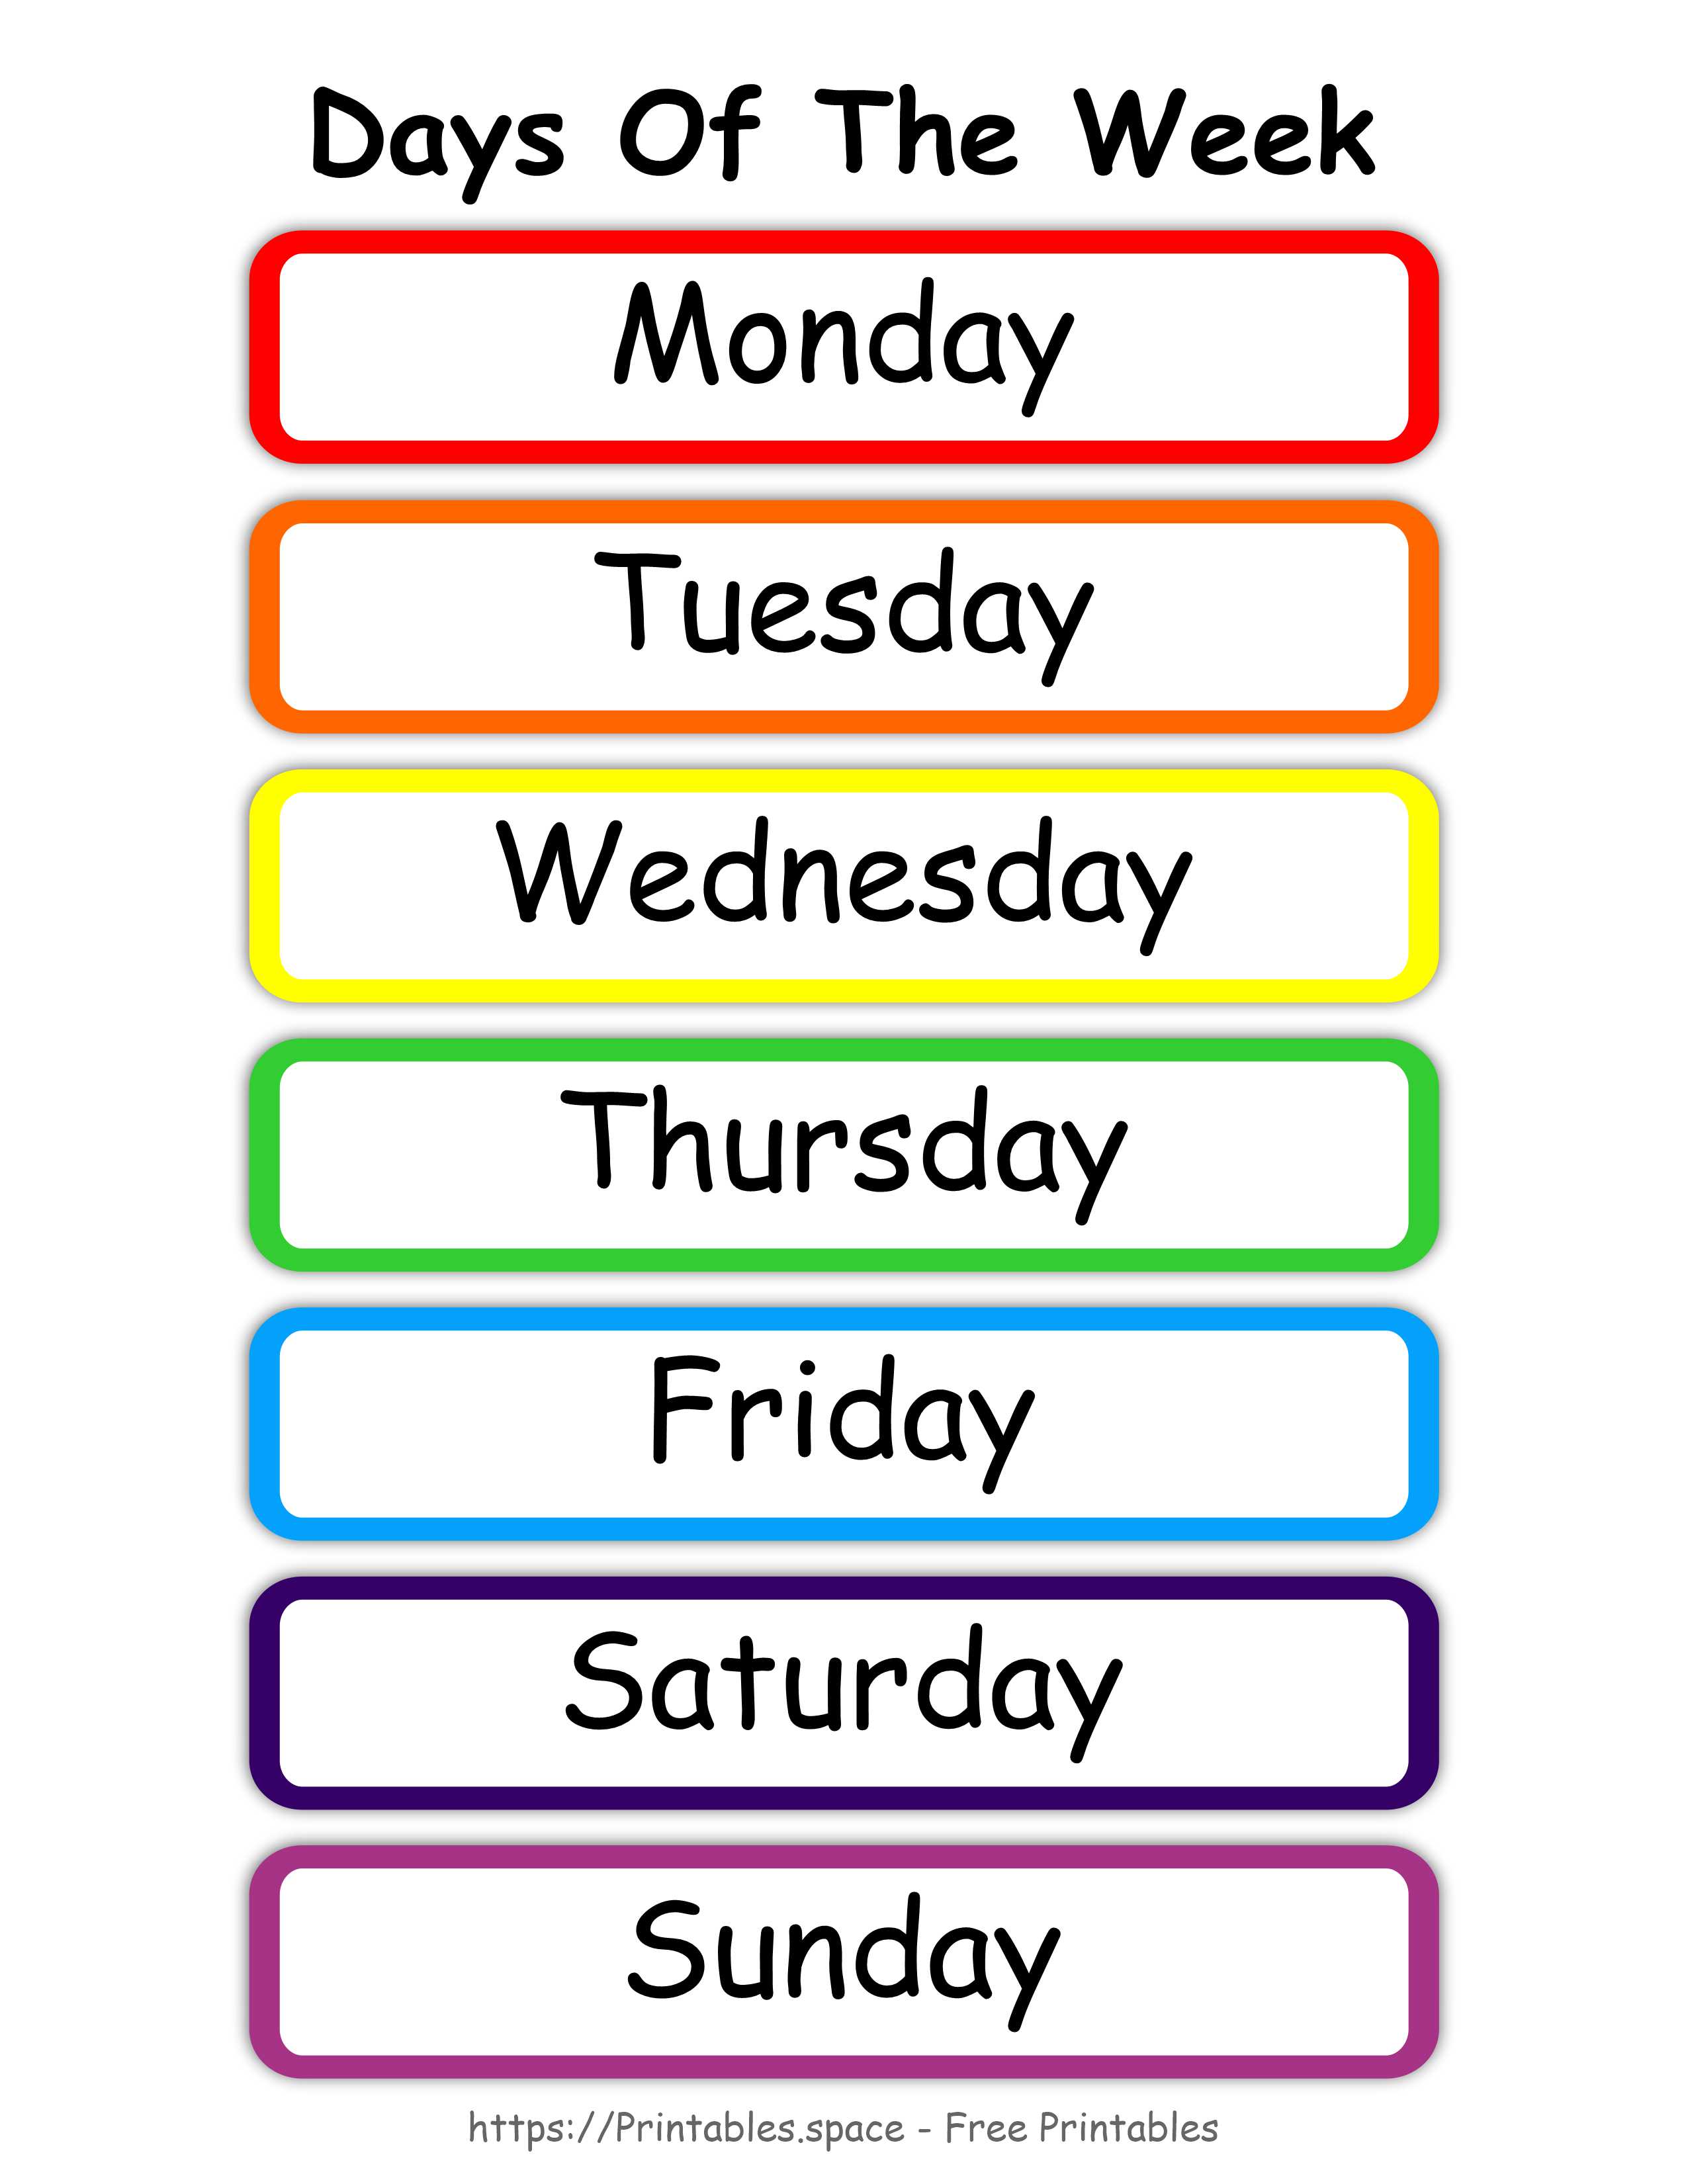 Colorful Days Of The Week Chart (Starting With Monday) Free Printables